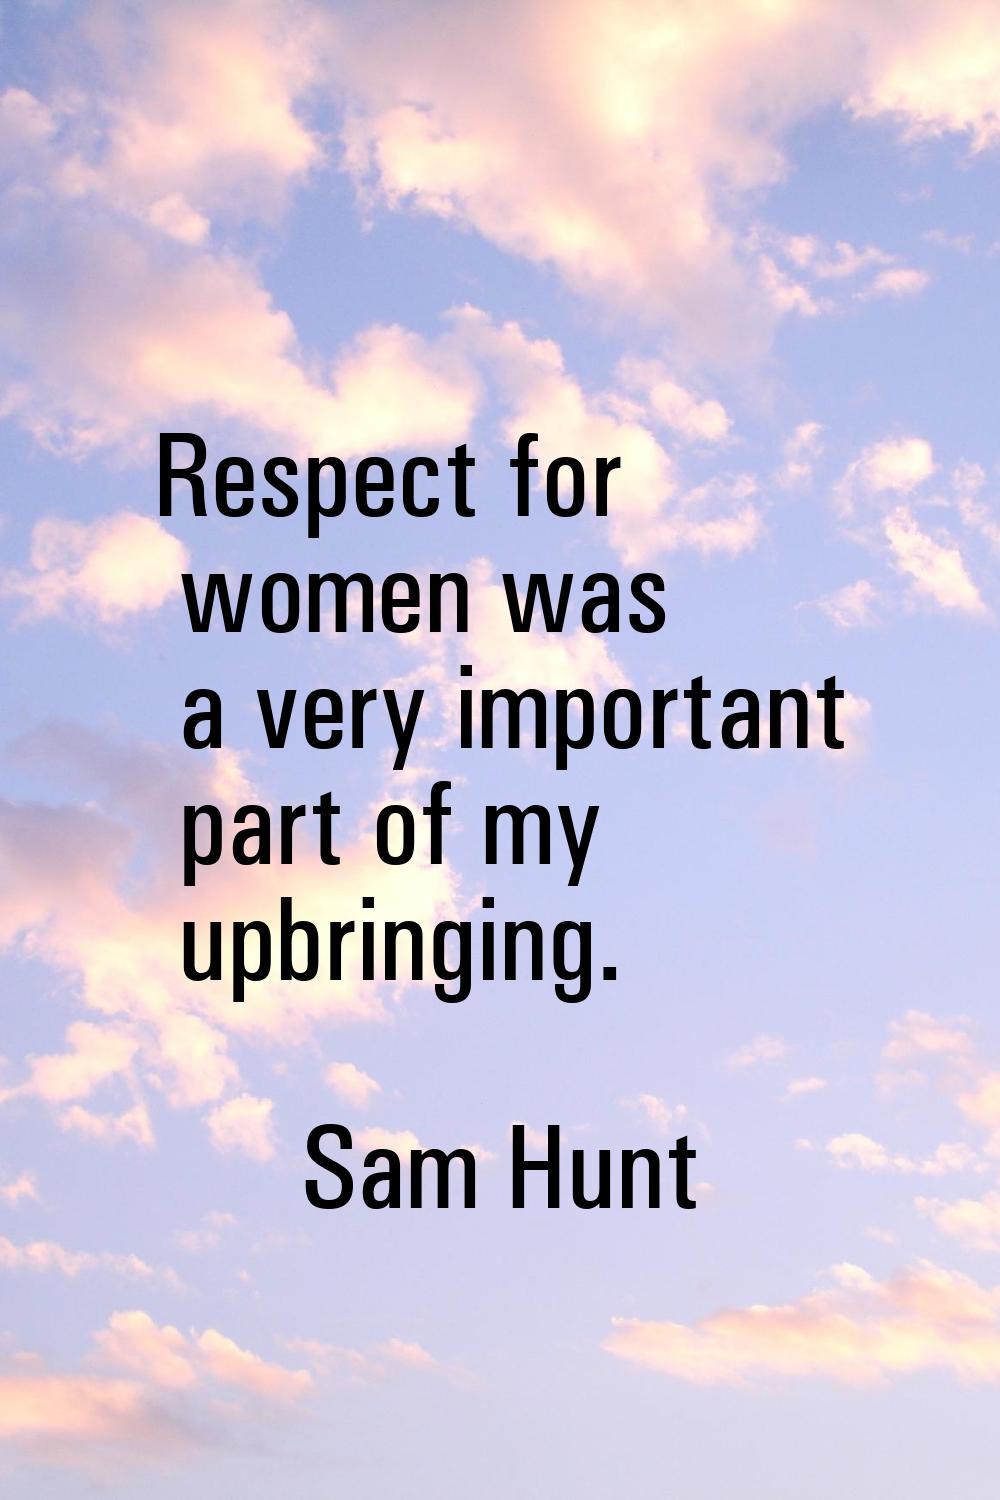 Respect for women was a very important part of my upbringing.